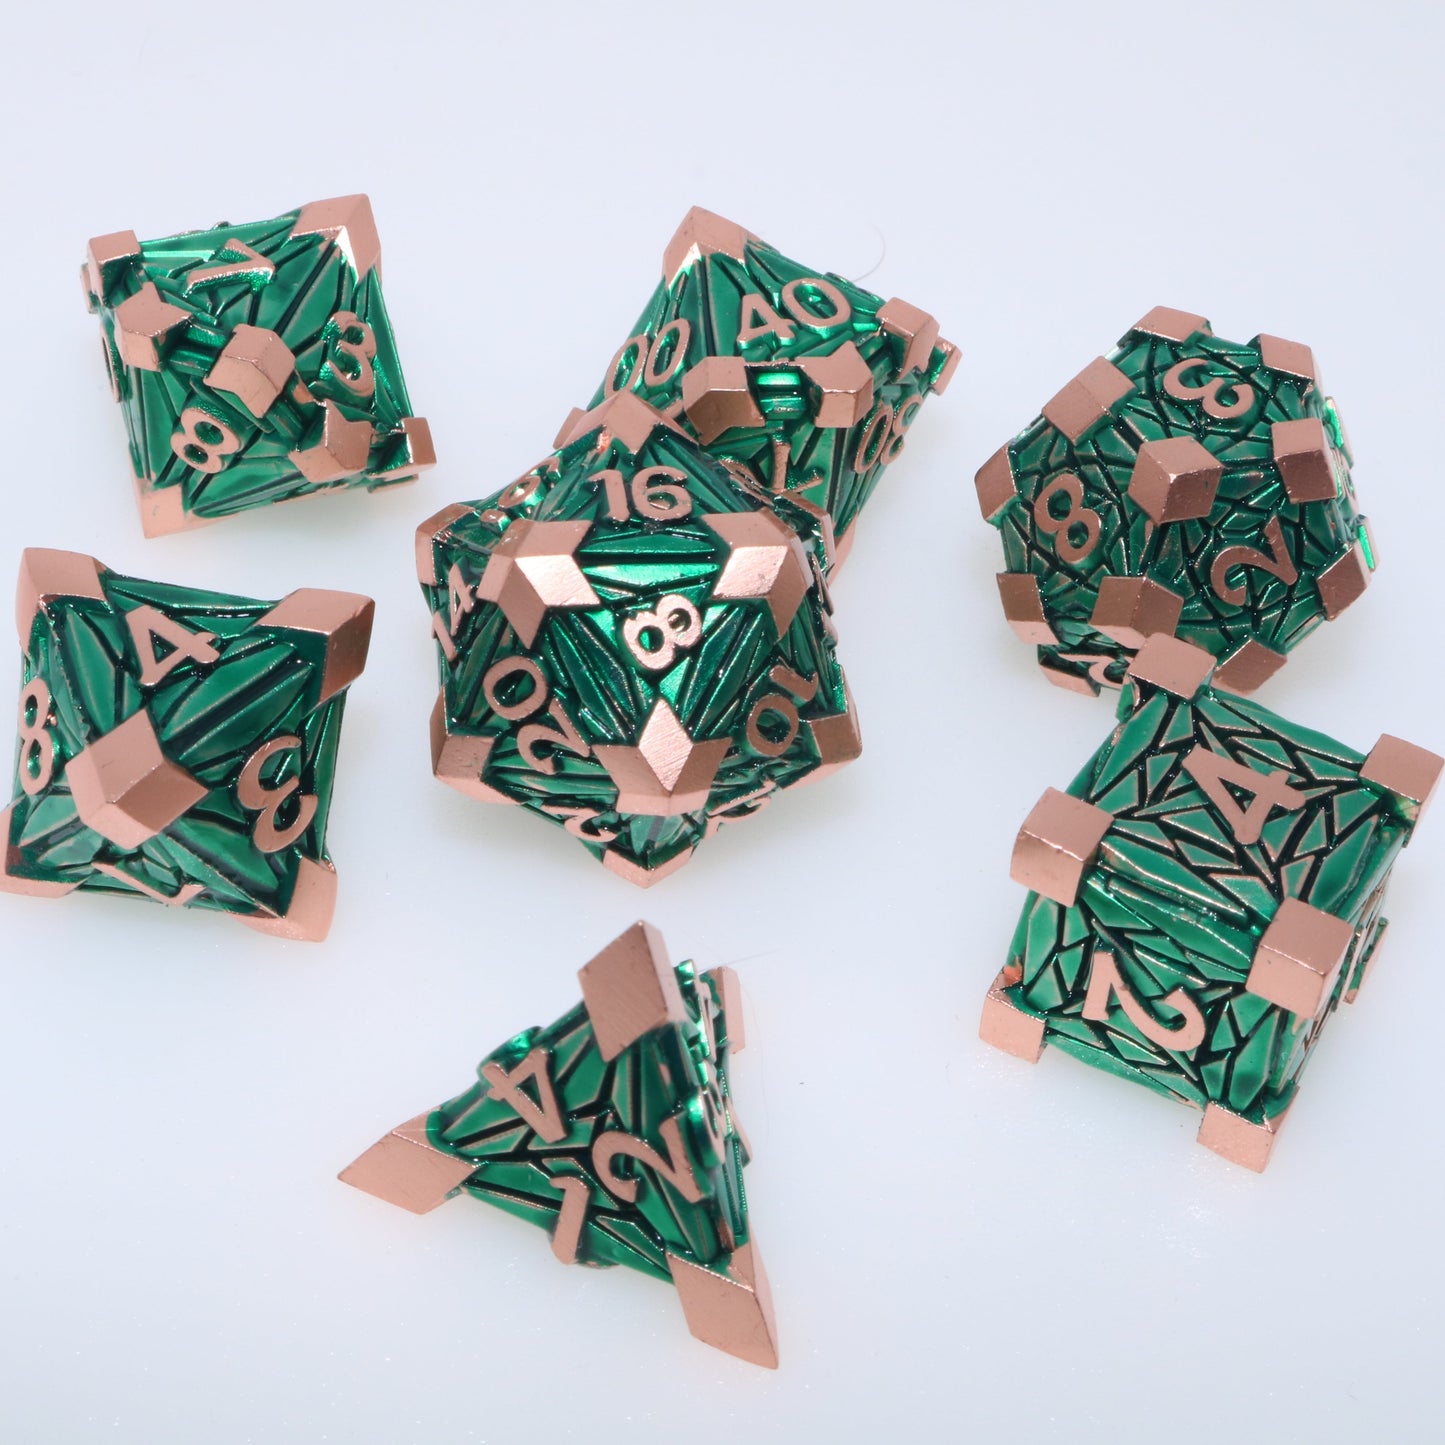 Wyrmscale Dice (set of 7)